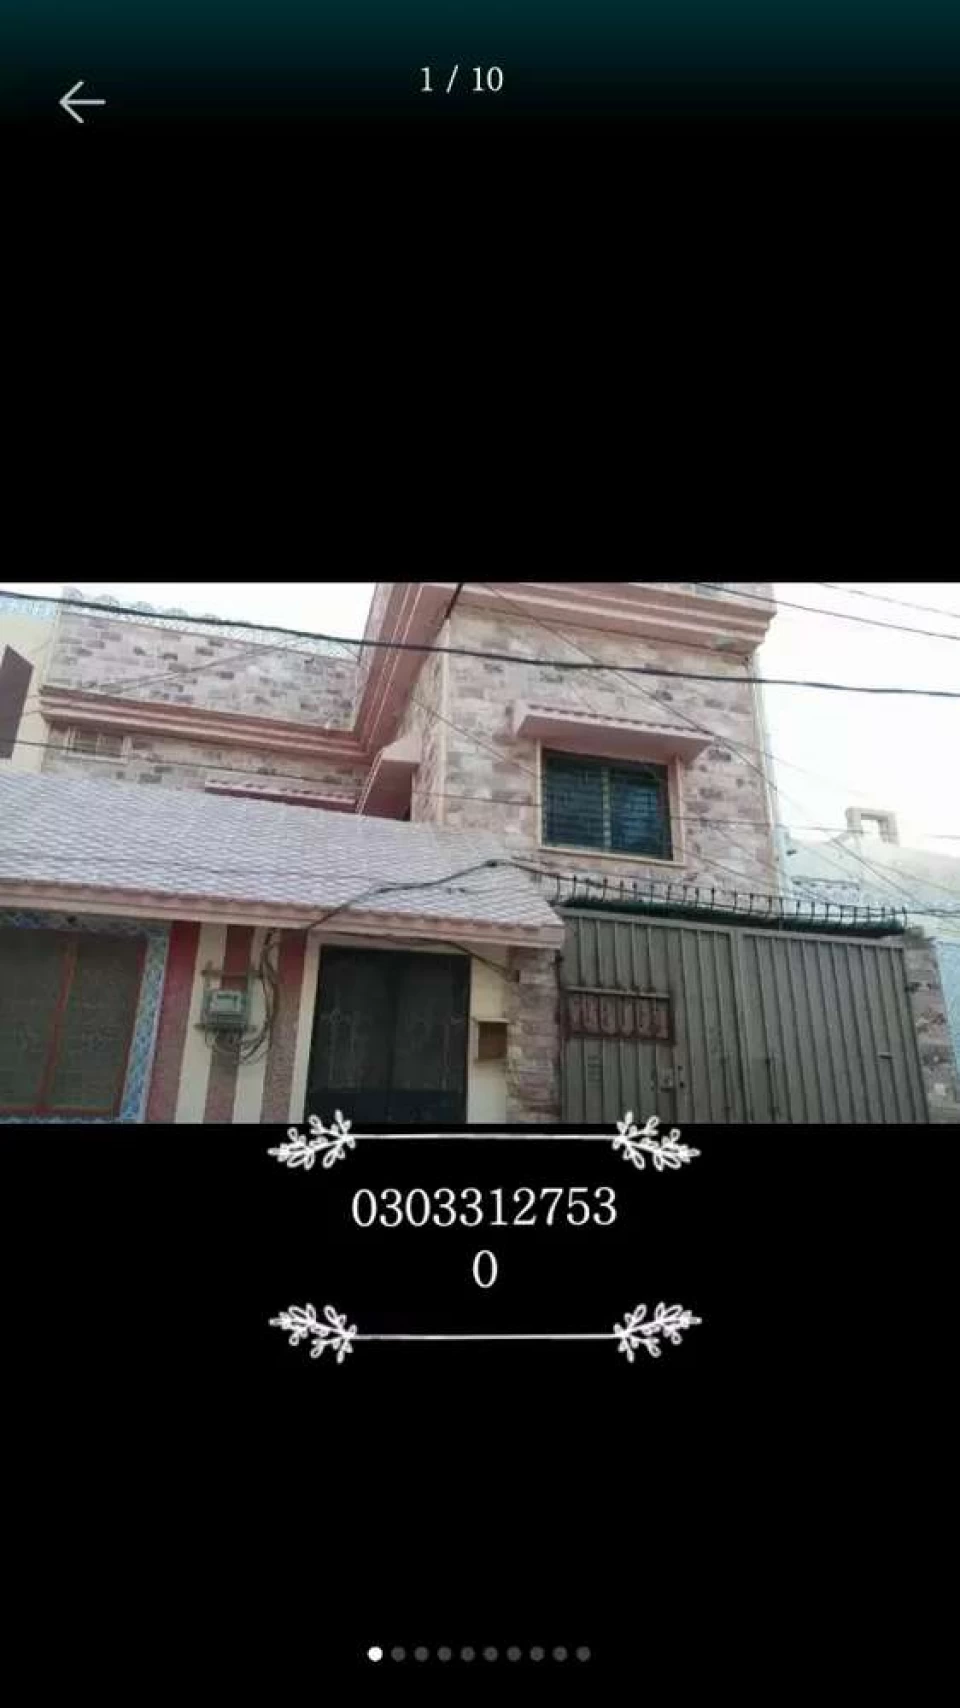 House for rent qasimabad